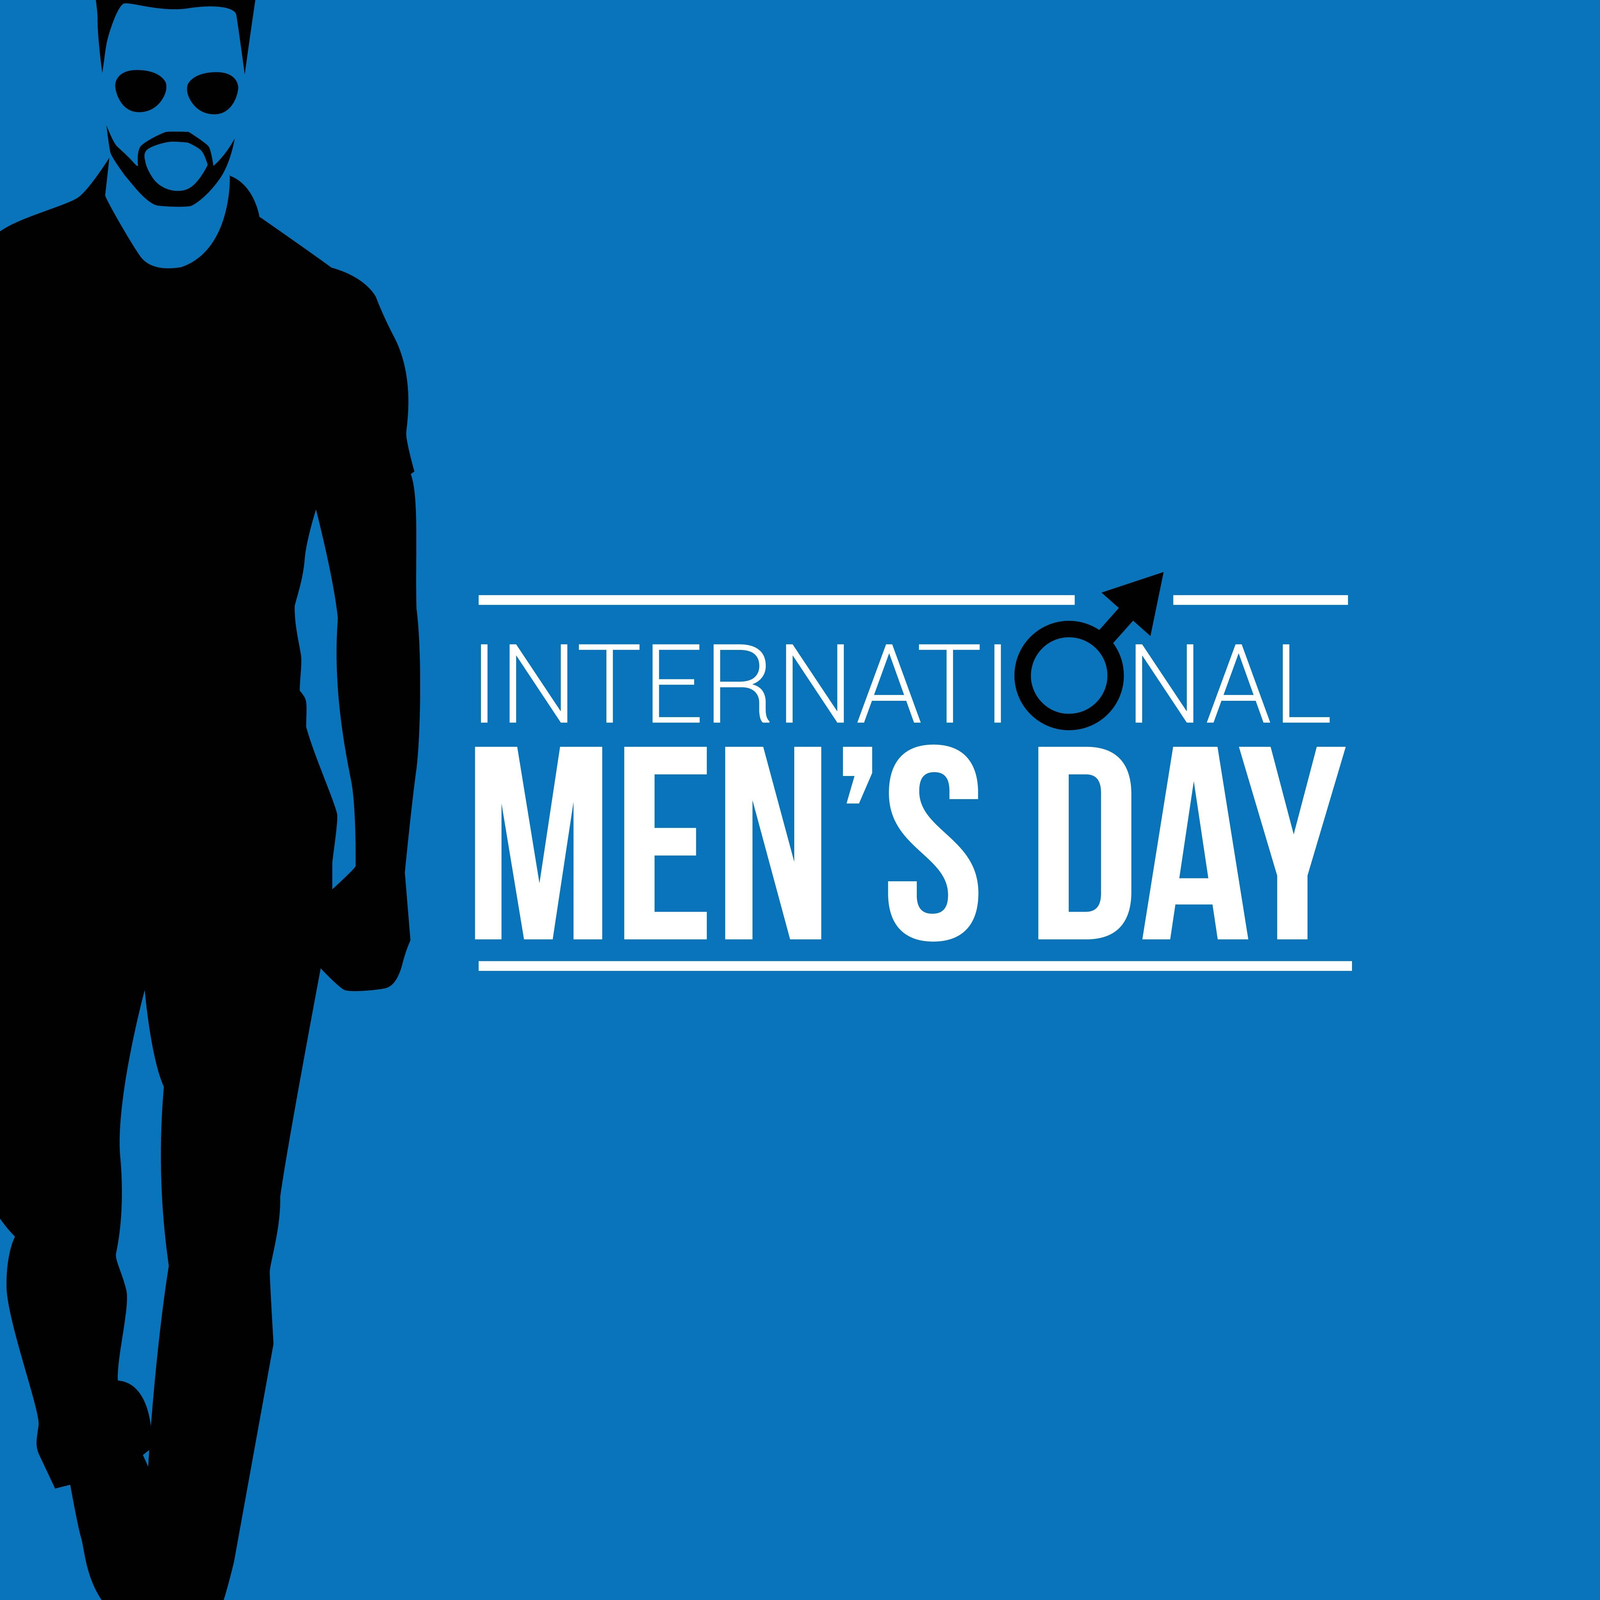 Happy International Men's Day 2021 Wishes, Images, Status, Quotes